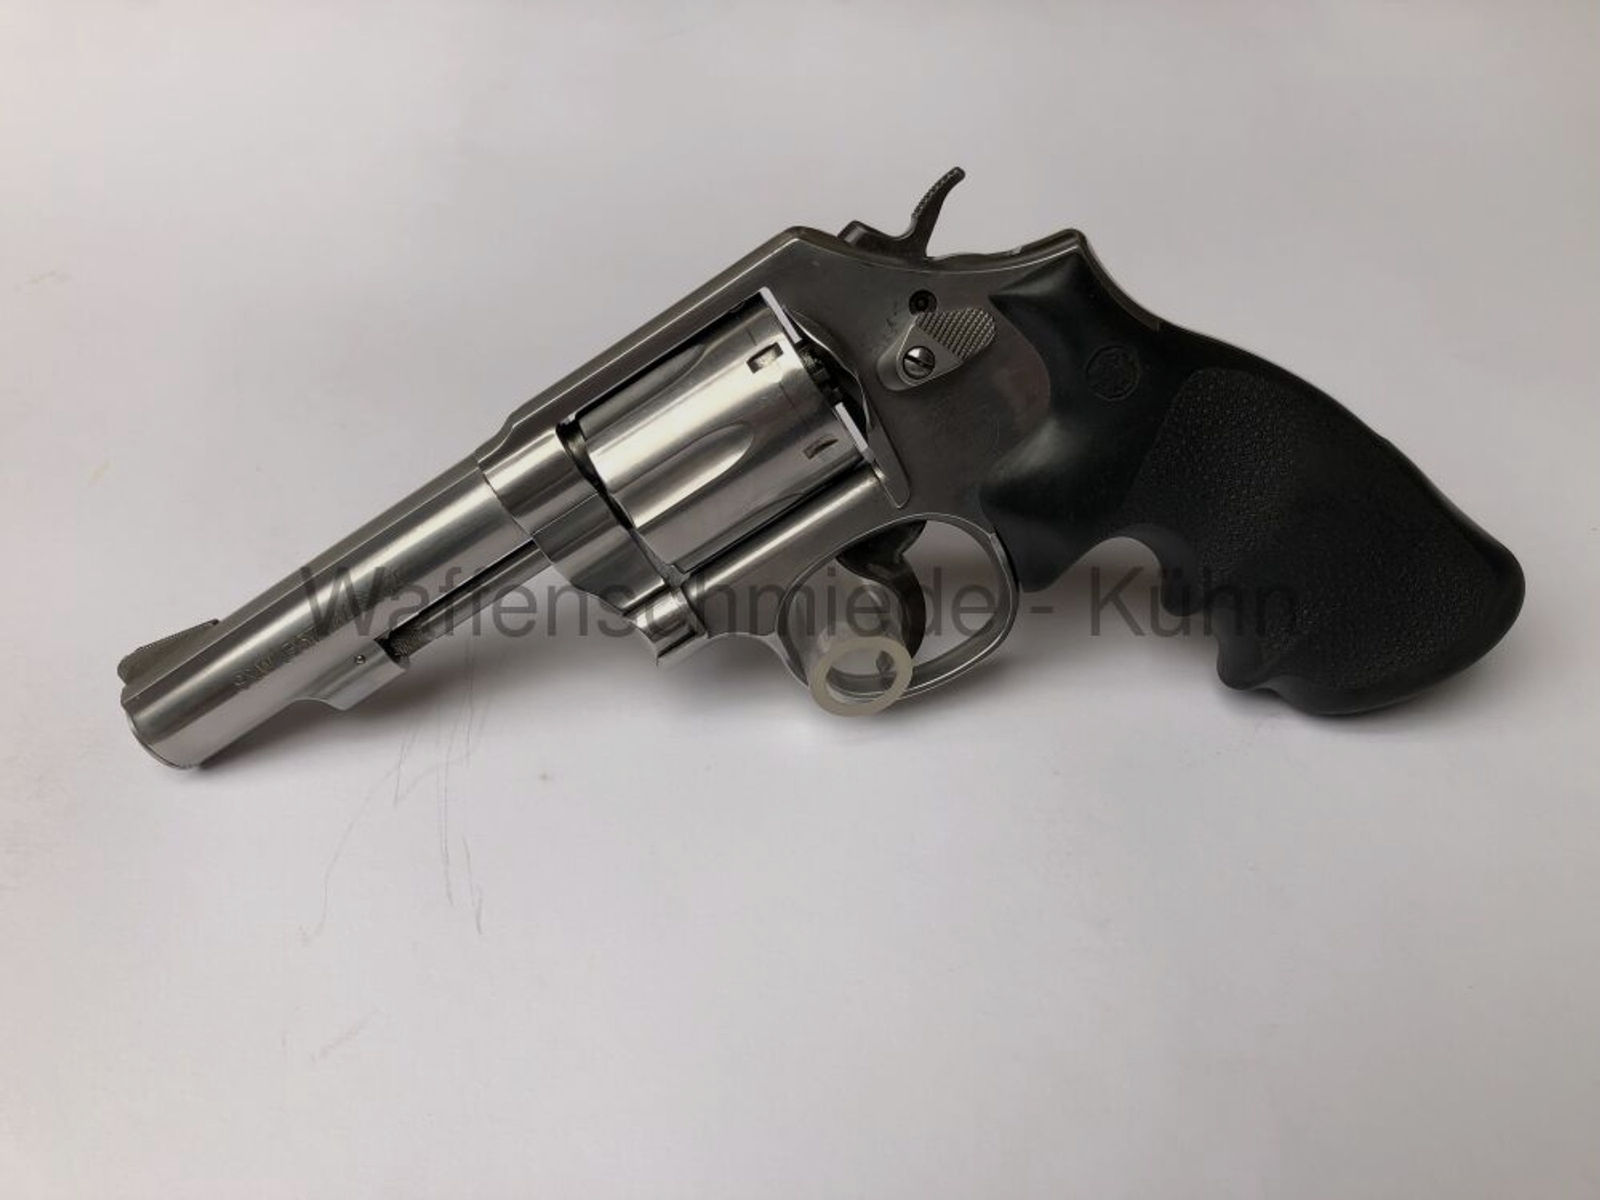 Smith & Wesson	 65-8